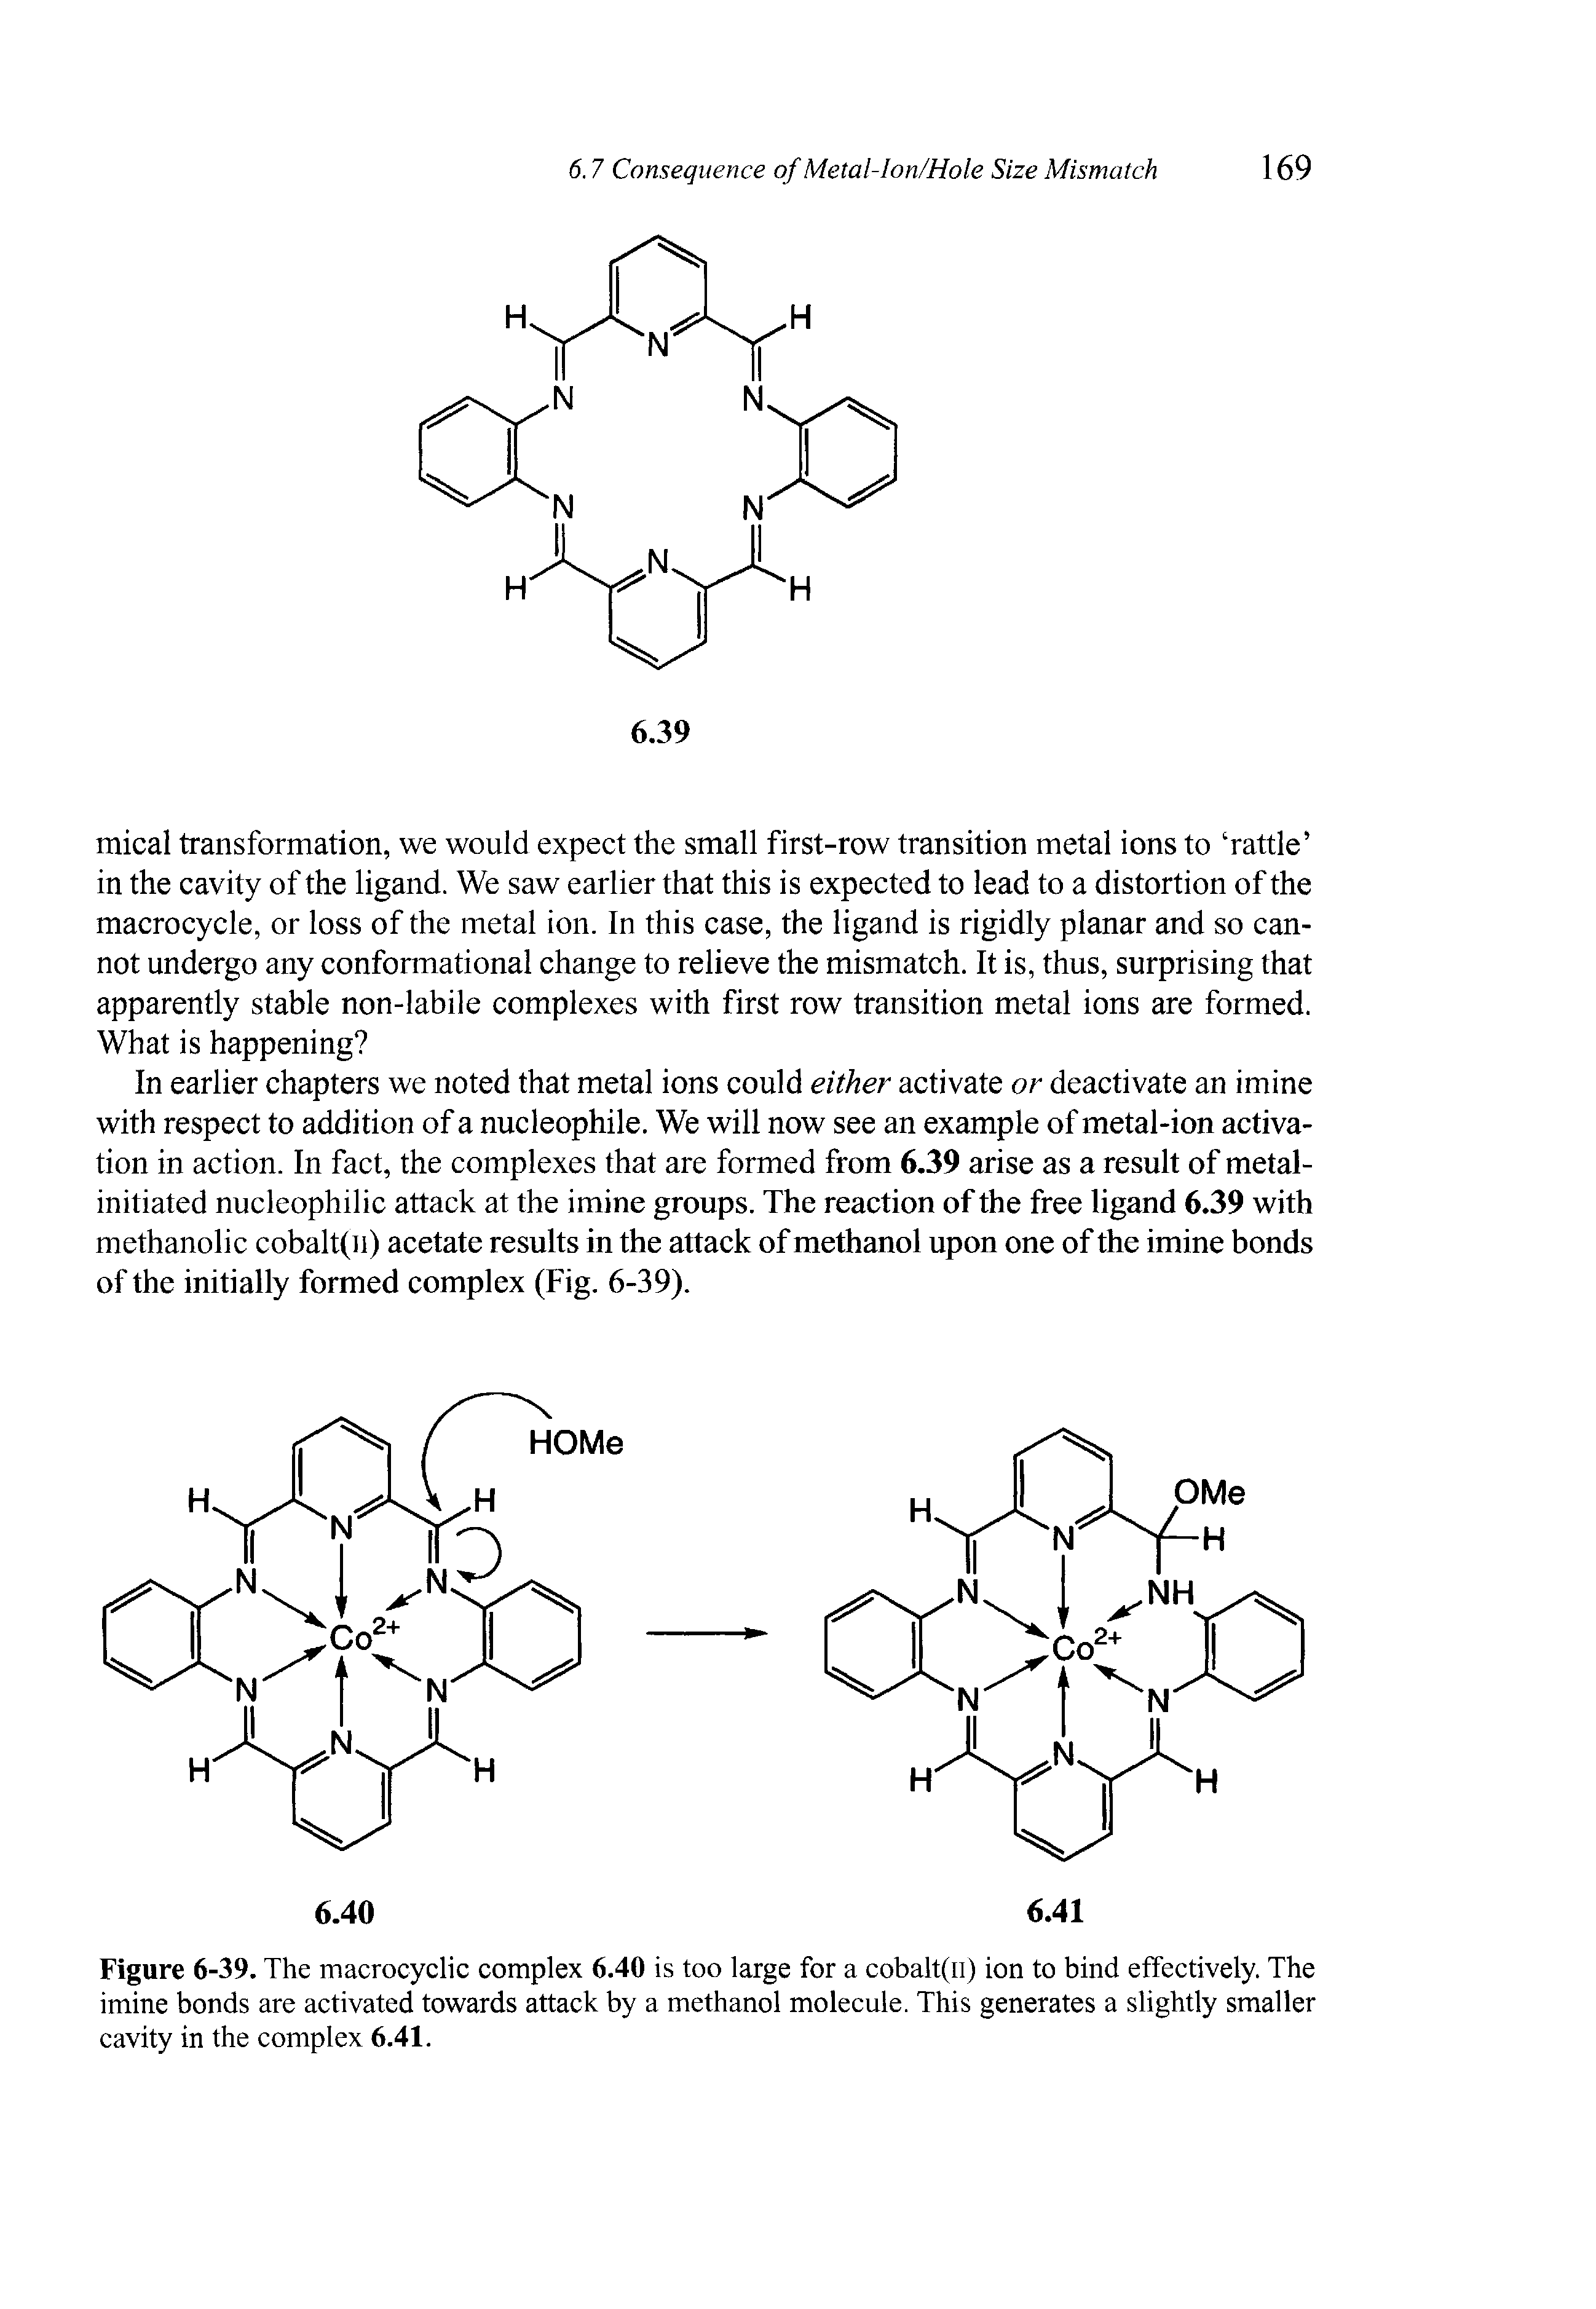 Figure 6-39. The macrocyclic complex 6.40 is too large for a cobalt(n) ion to bind effectively. The imine bonds are activated towards attack by a methanol molecule. This generates a slightly smaller cavity in the complex 6.41.